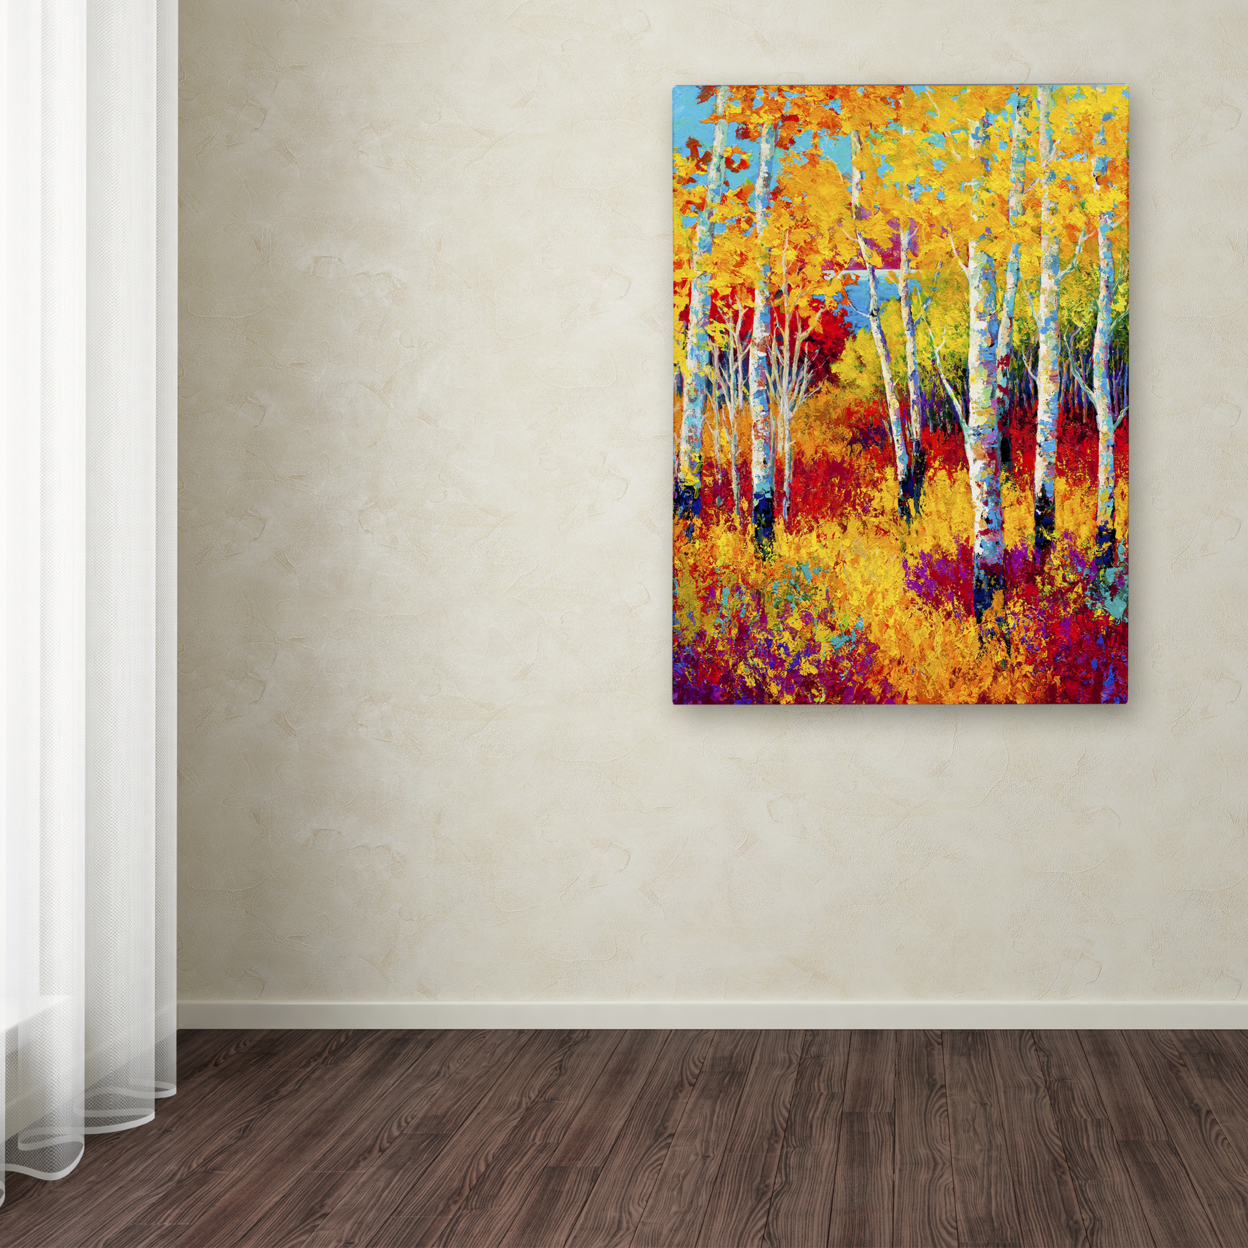 Marion Rose 'Autumn Dreams' Ready To Hang Canvas Art 18 X 24 Inches Made In USA